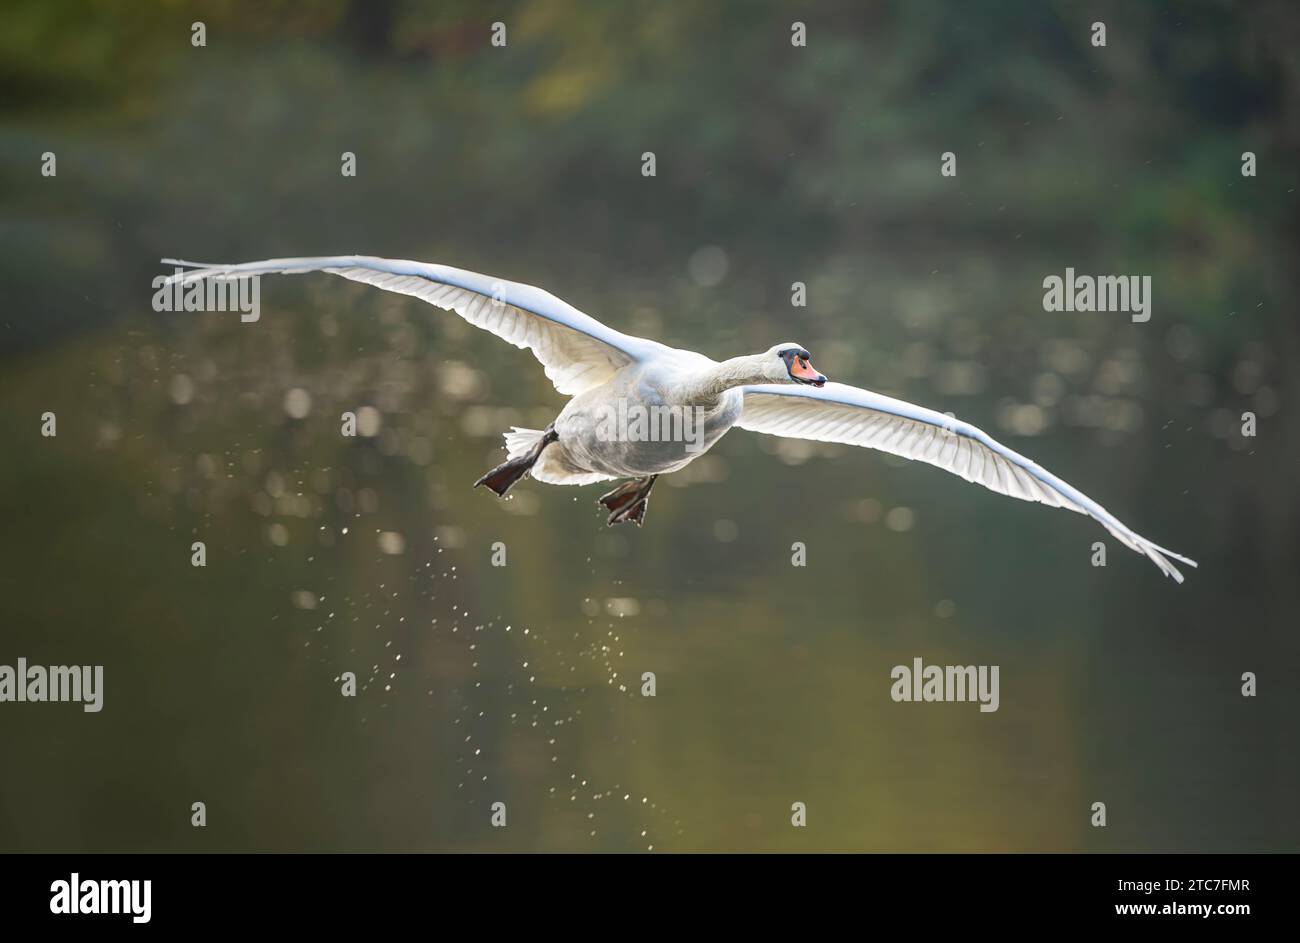 Close up front view of a mute swan flying over a pool of water on a sunny winter's day. Stock Photo